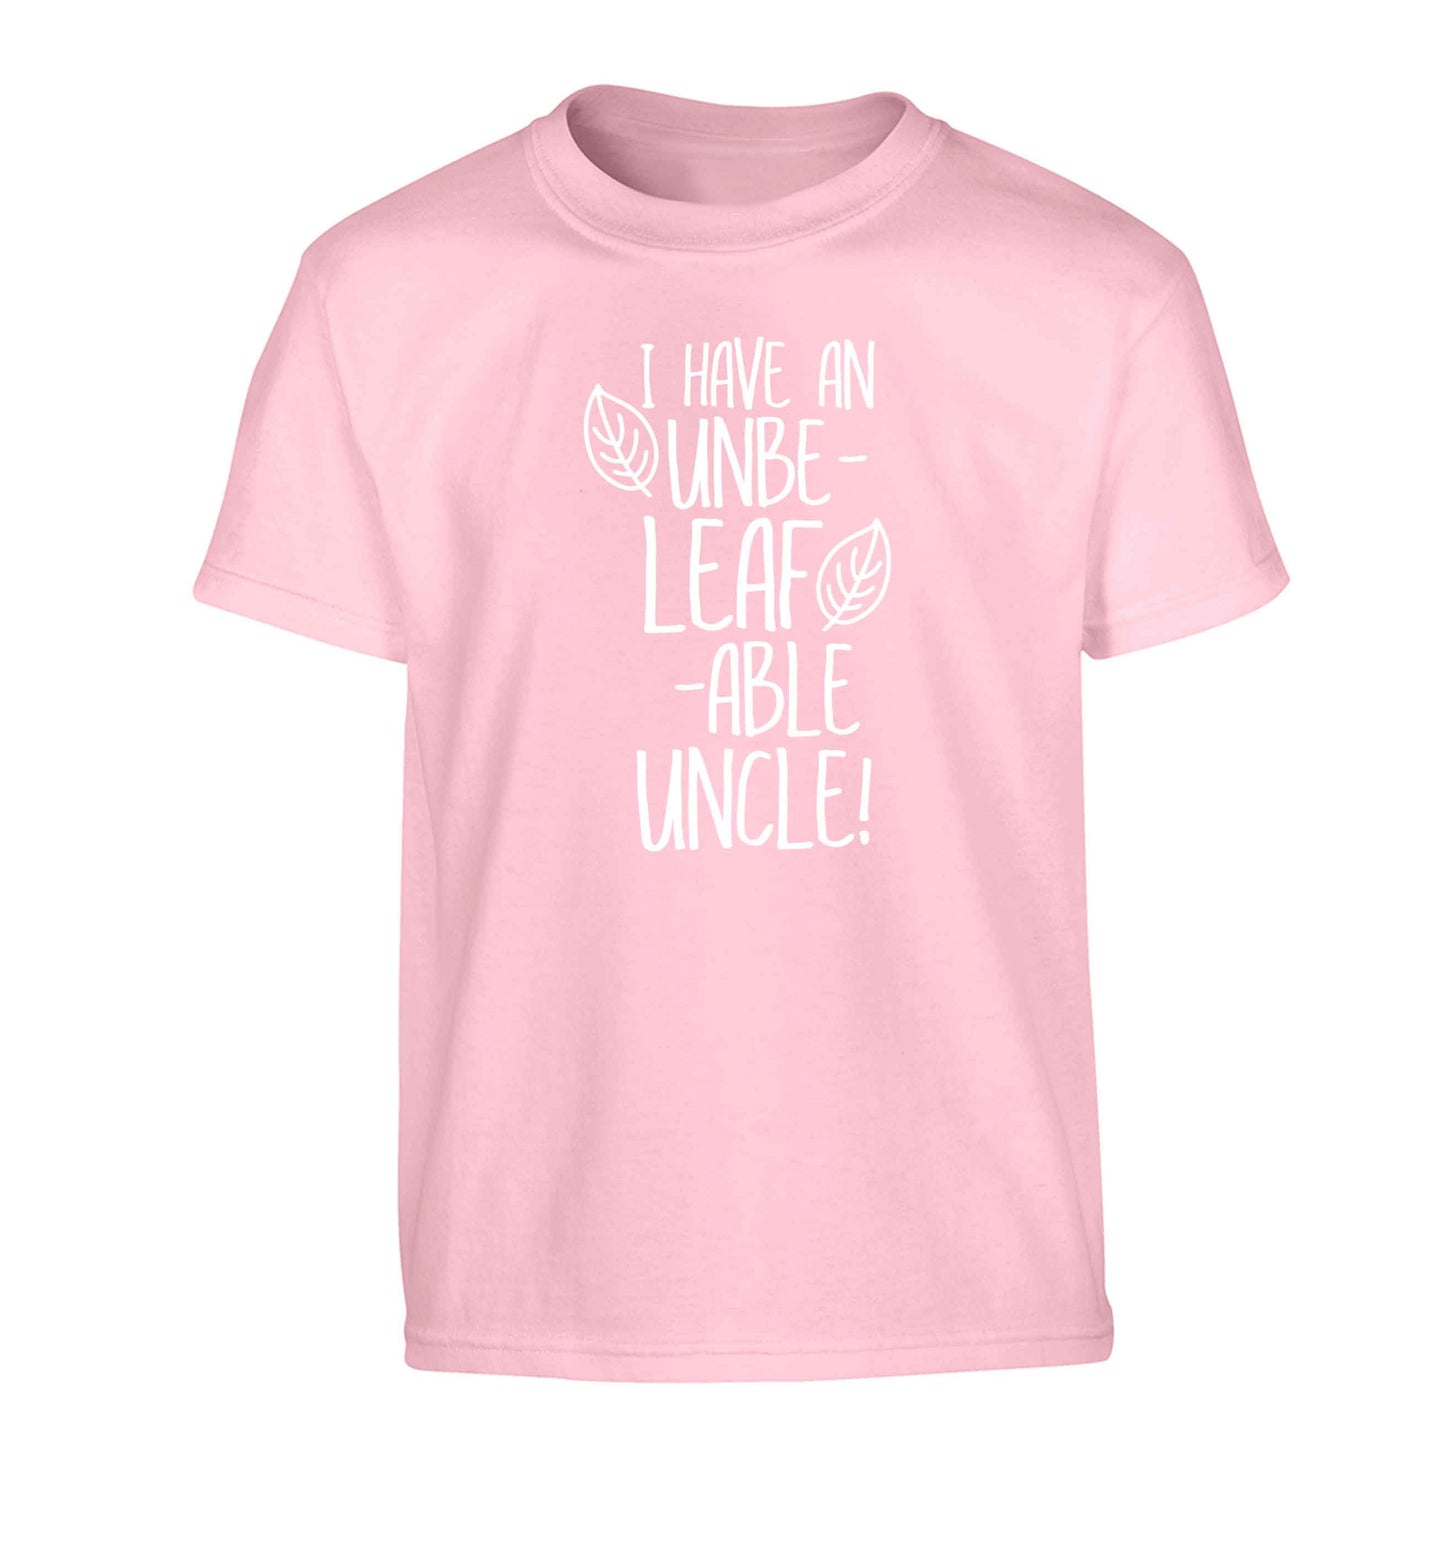 I have an unbe-leaf-able uncle Children's light pink Tshirt 12-13 Years